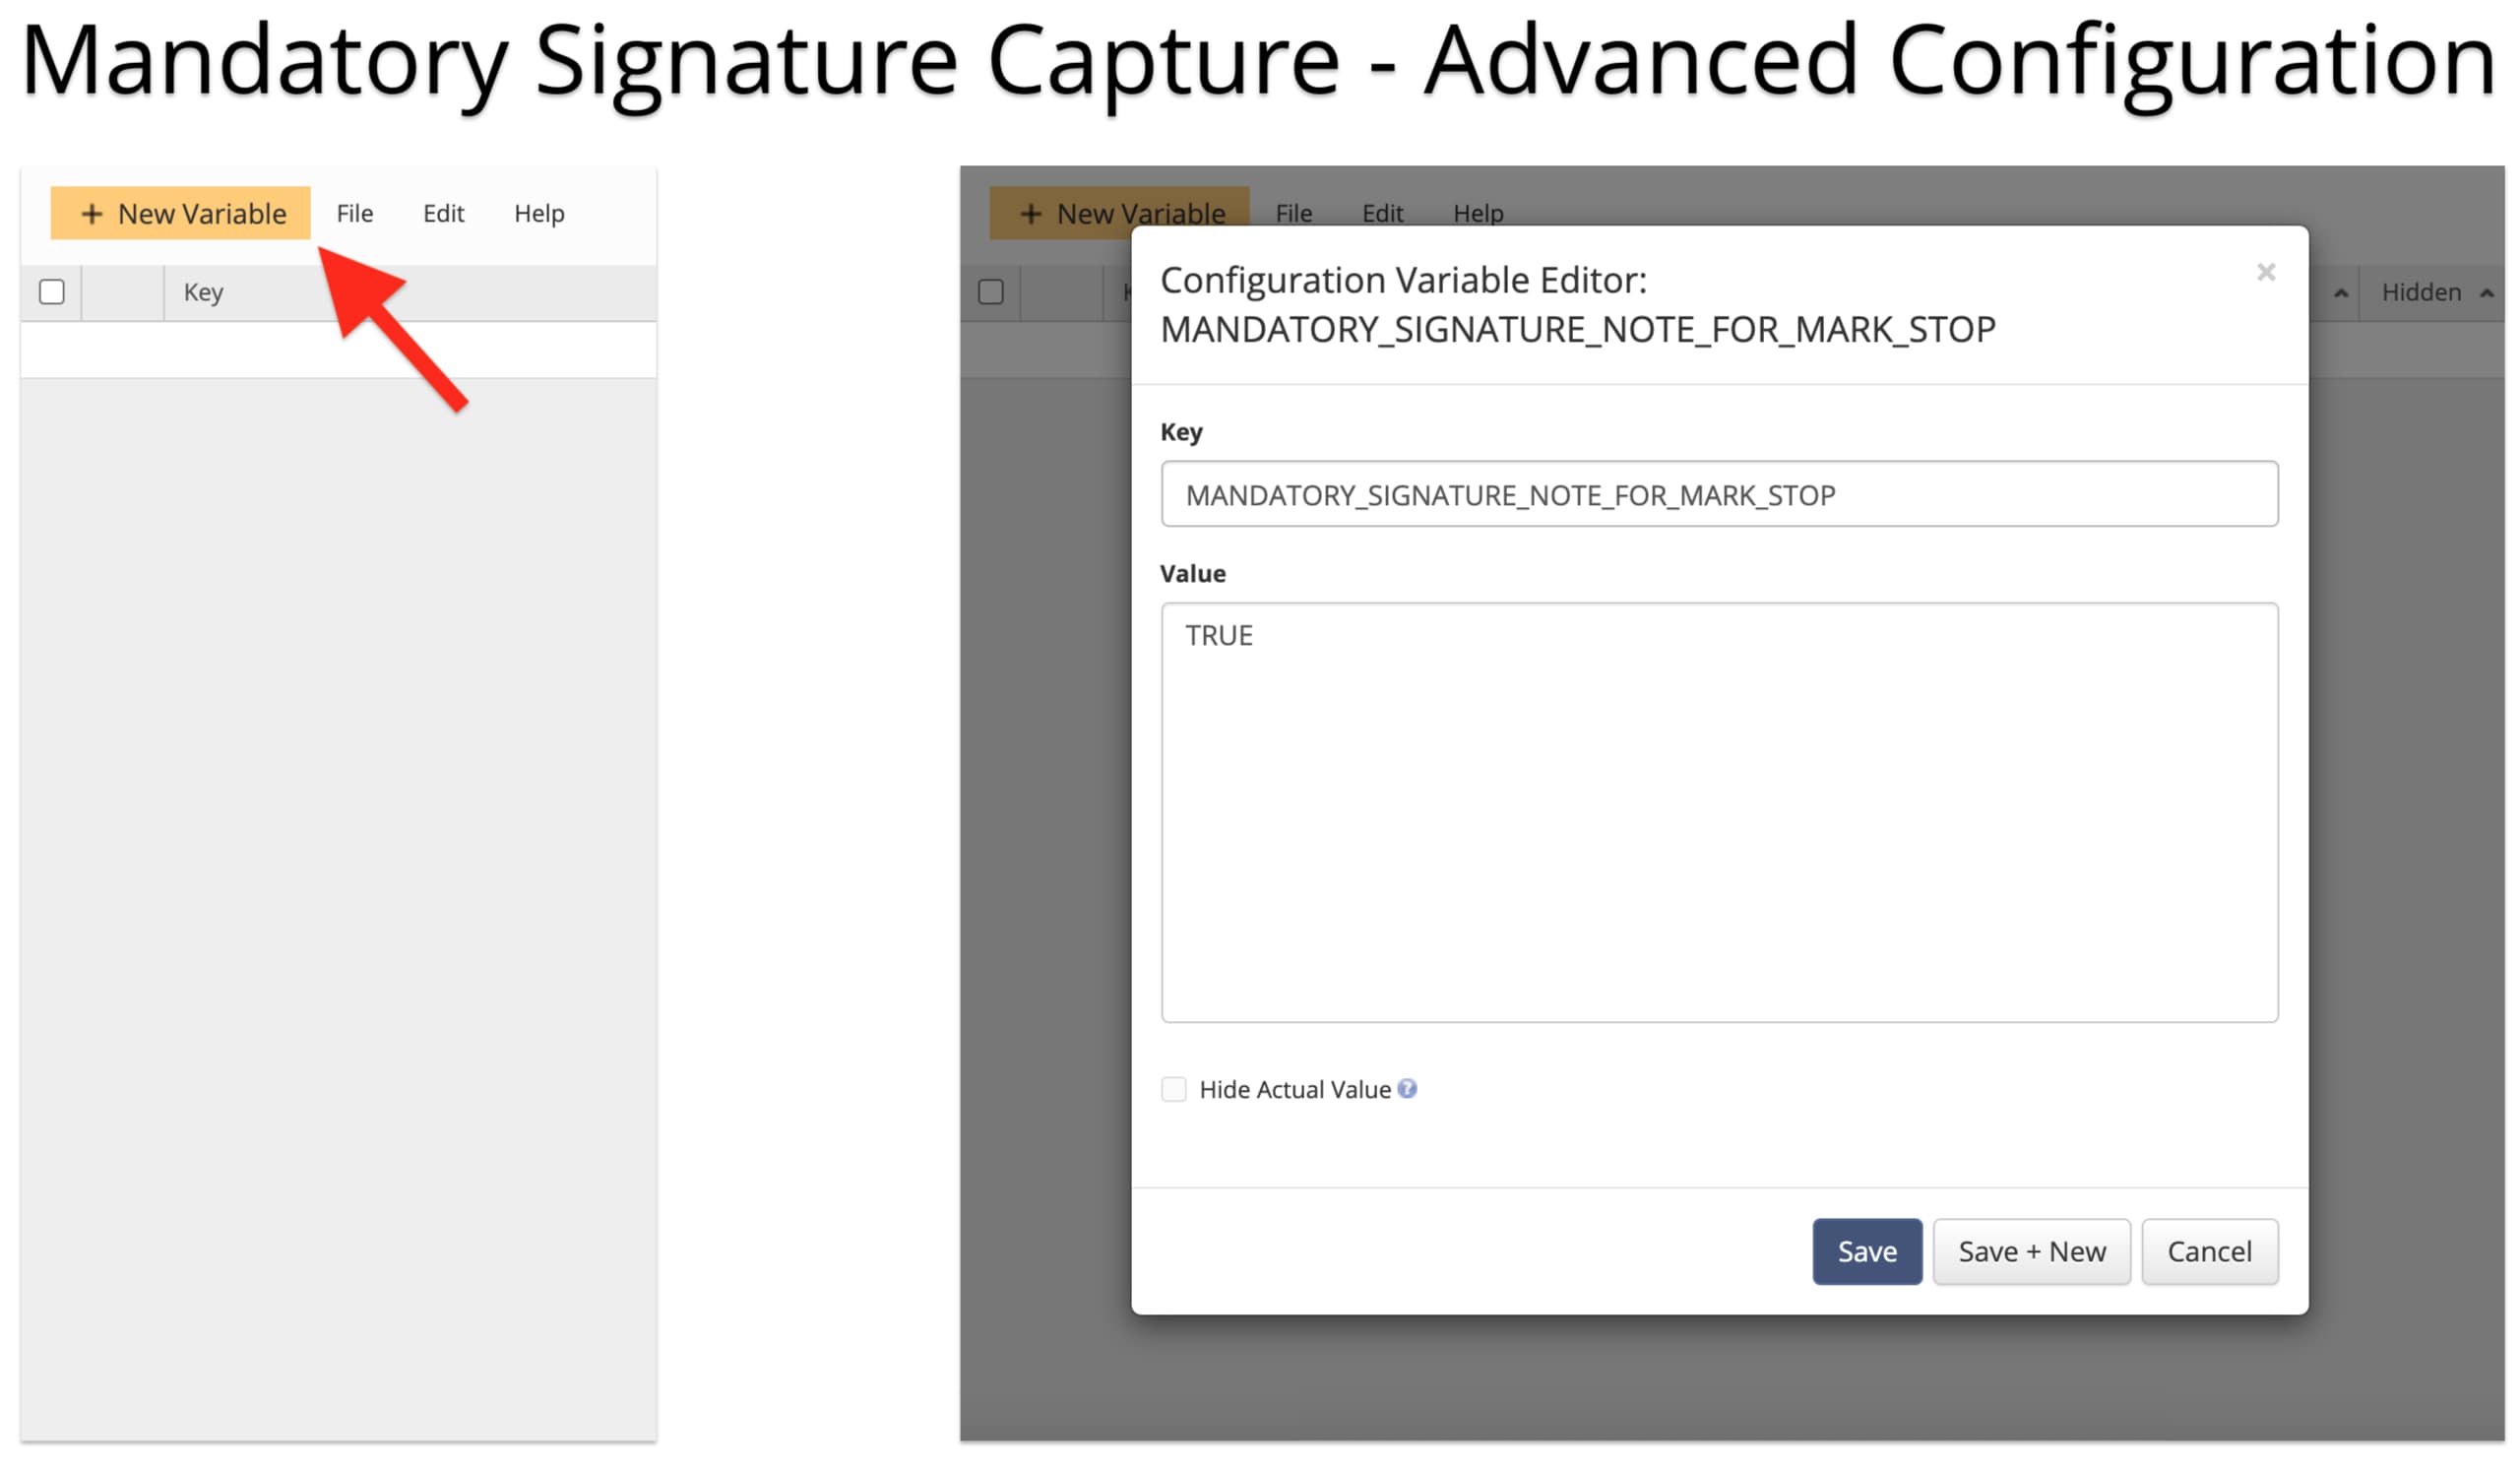 Enable mandatory signature capture and POD collection in route planner advanced configurations.